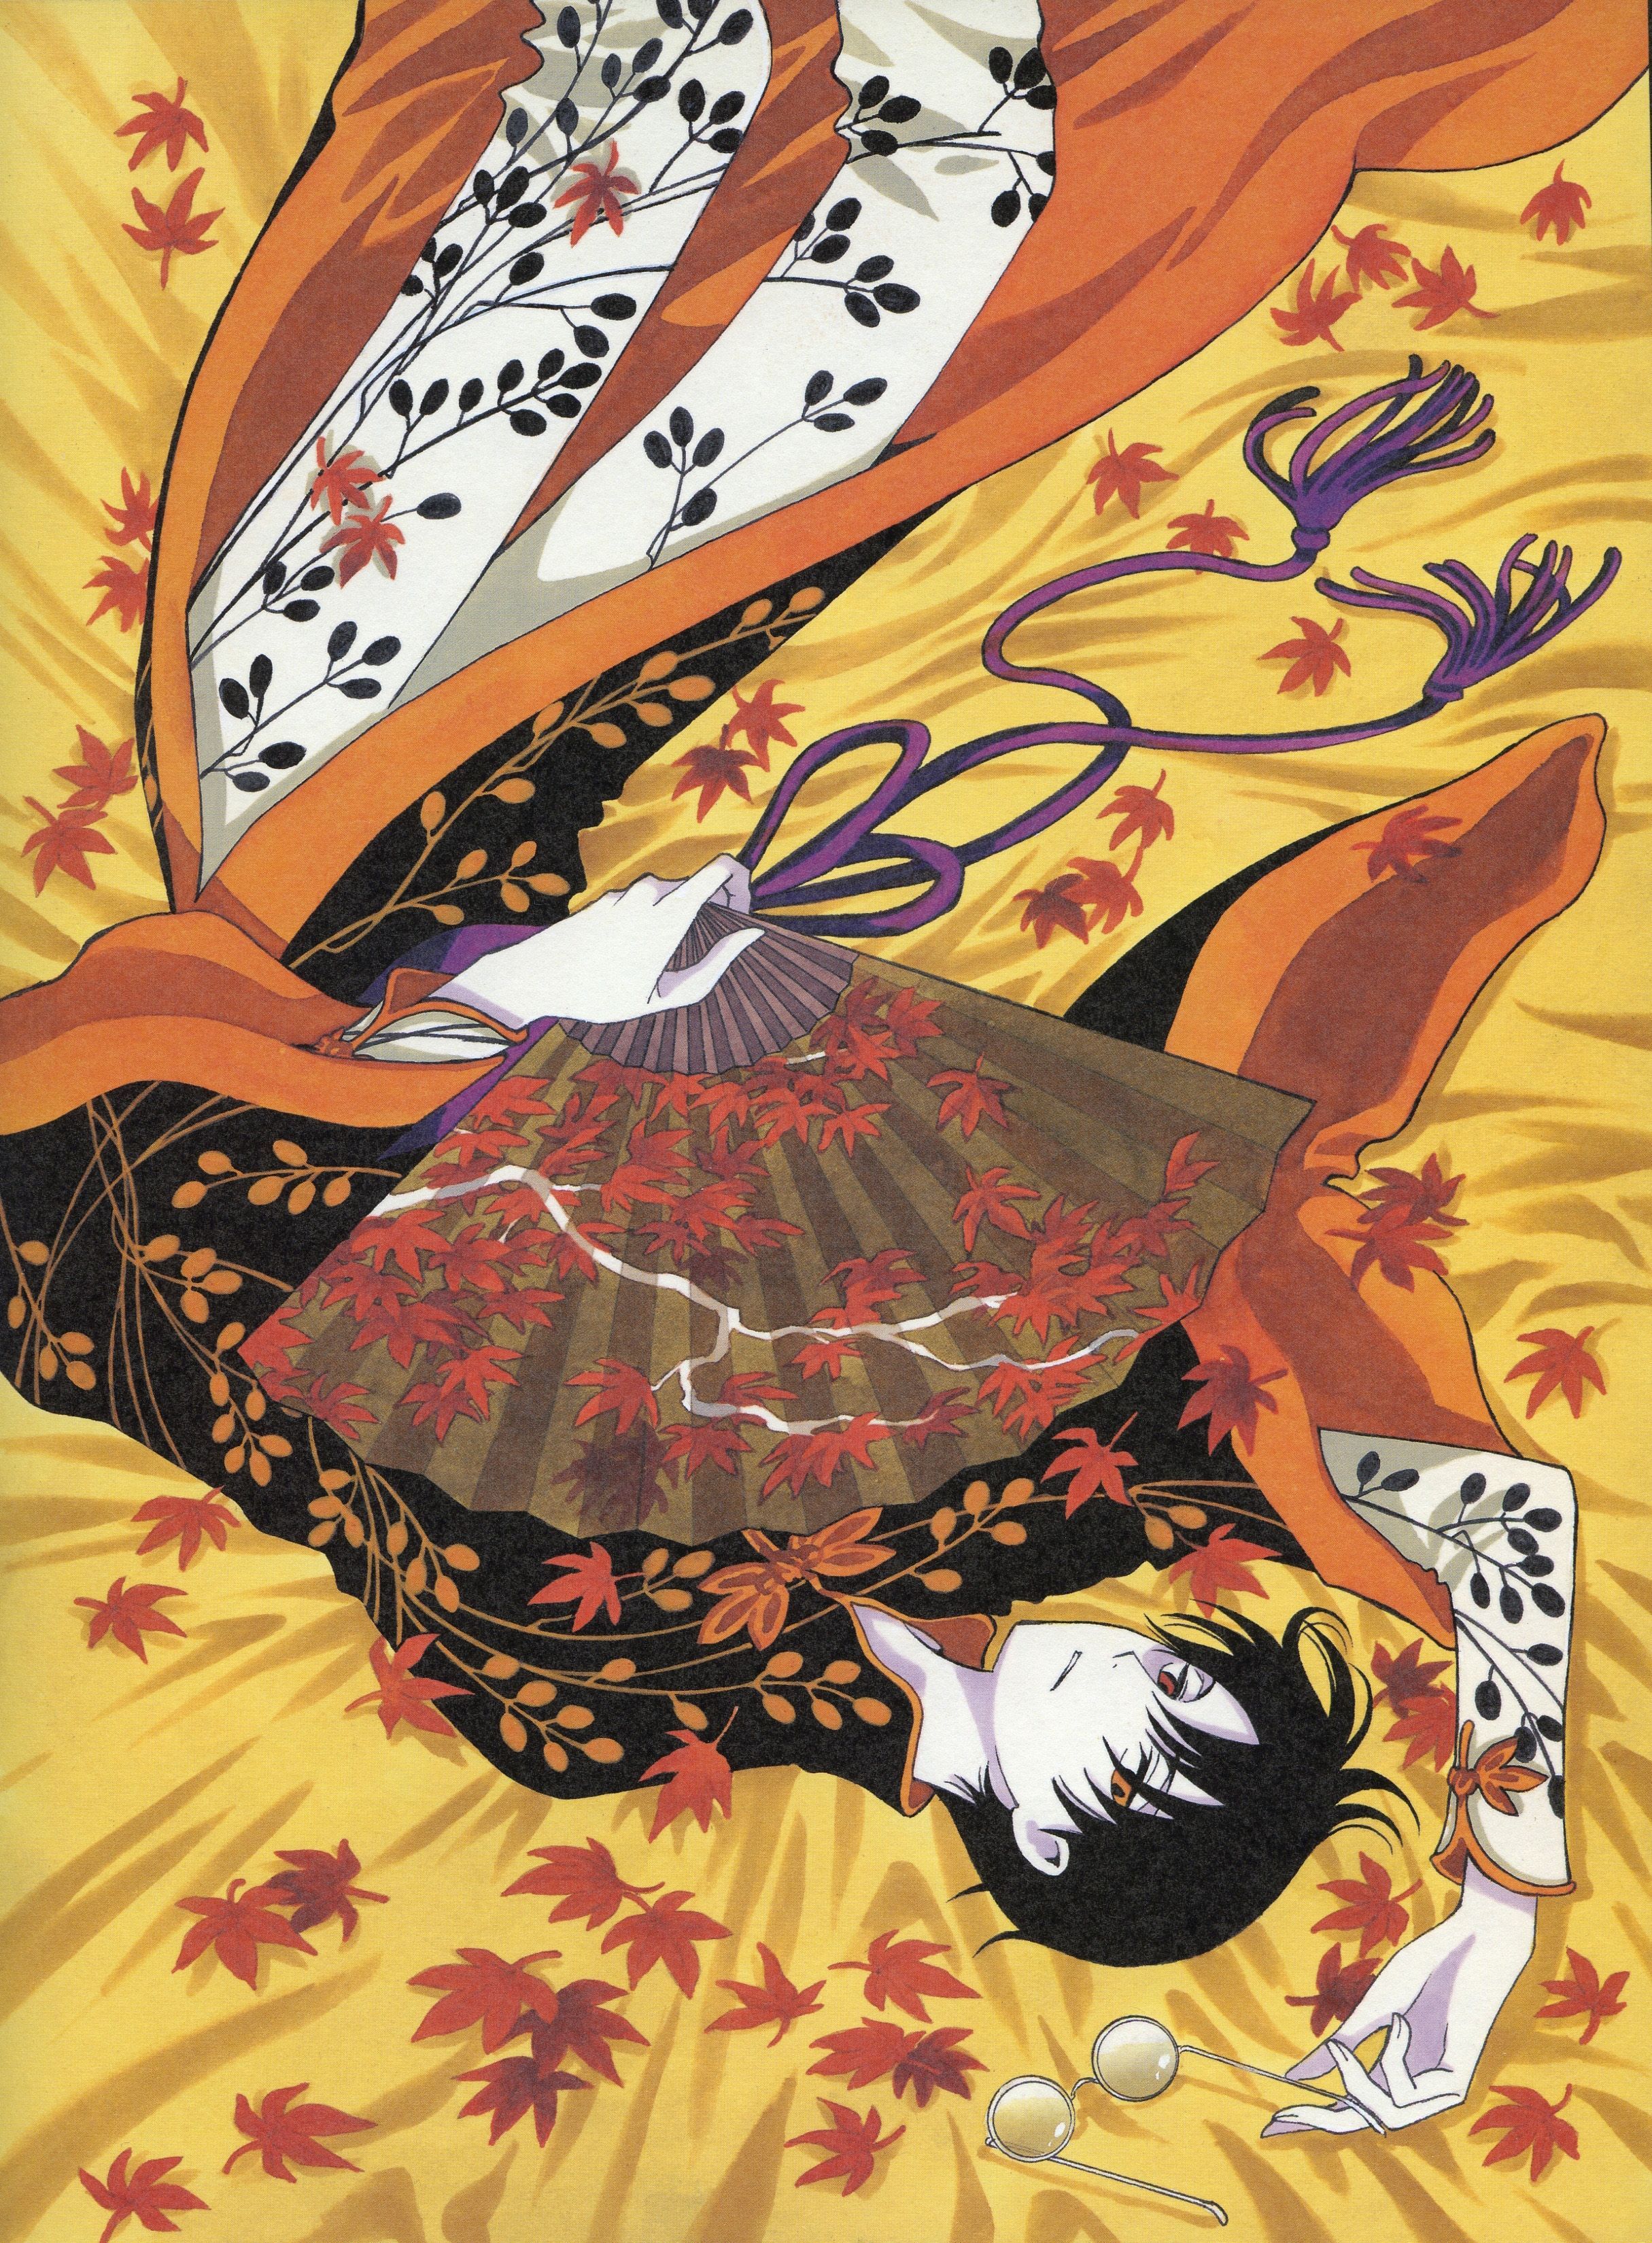 Watanuki Relaxing In XXXHolic Illustration By Clamp